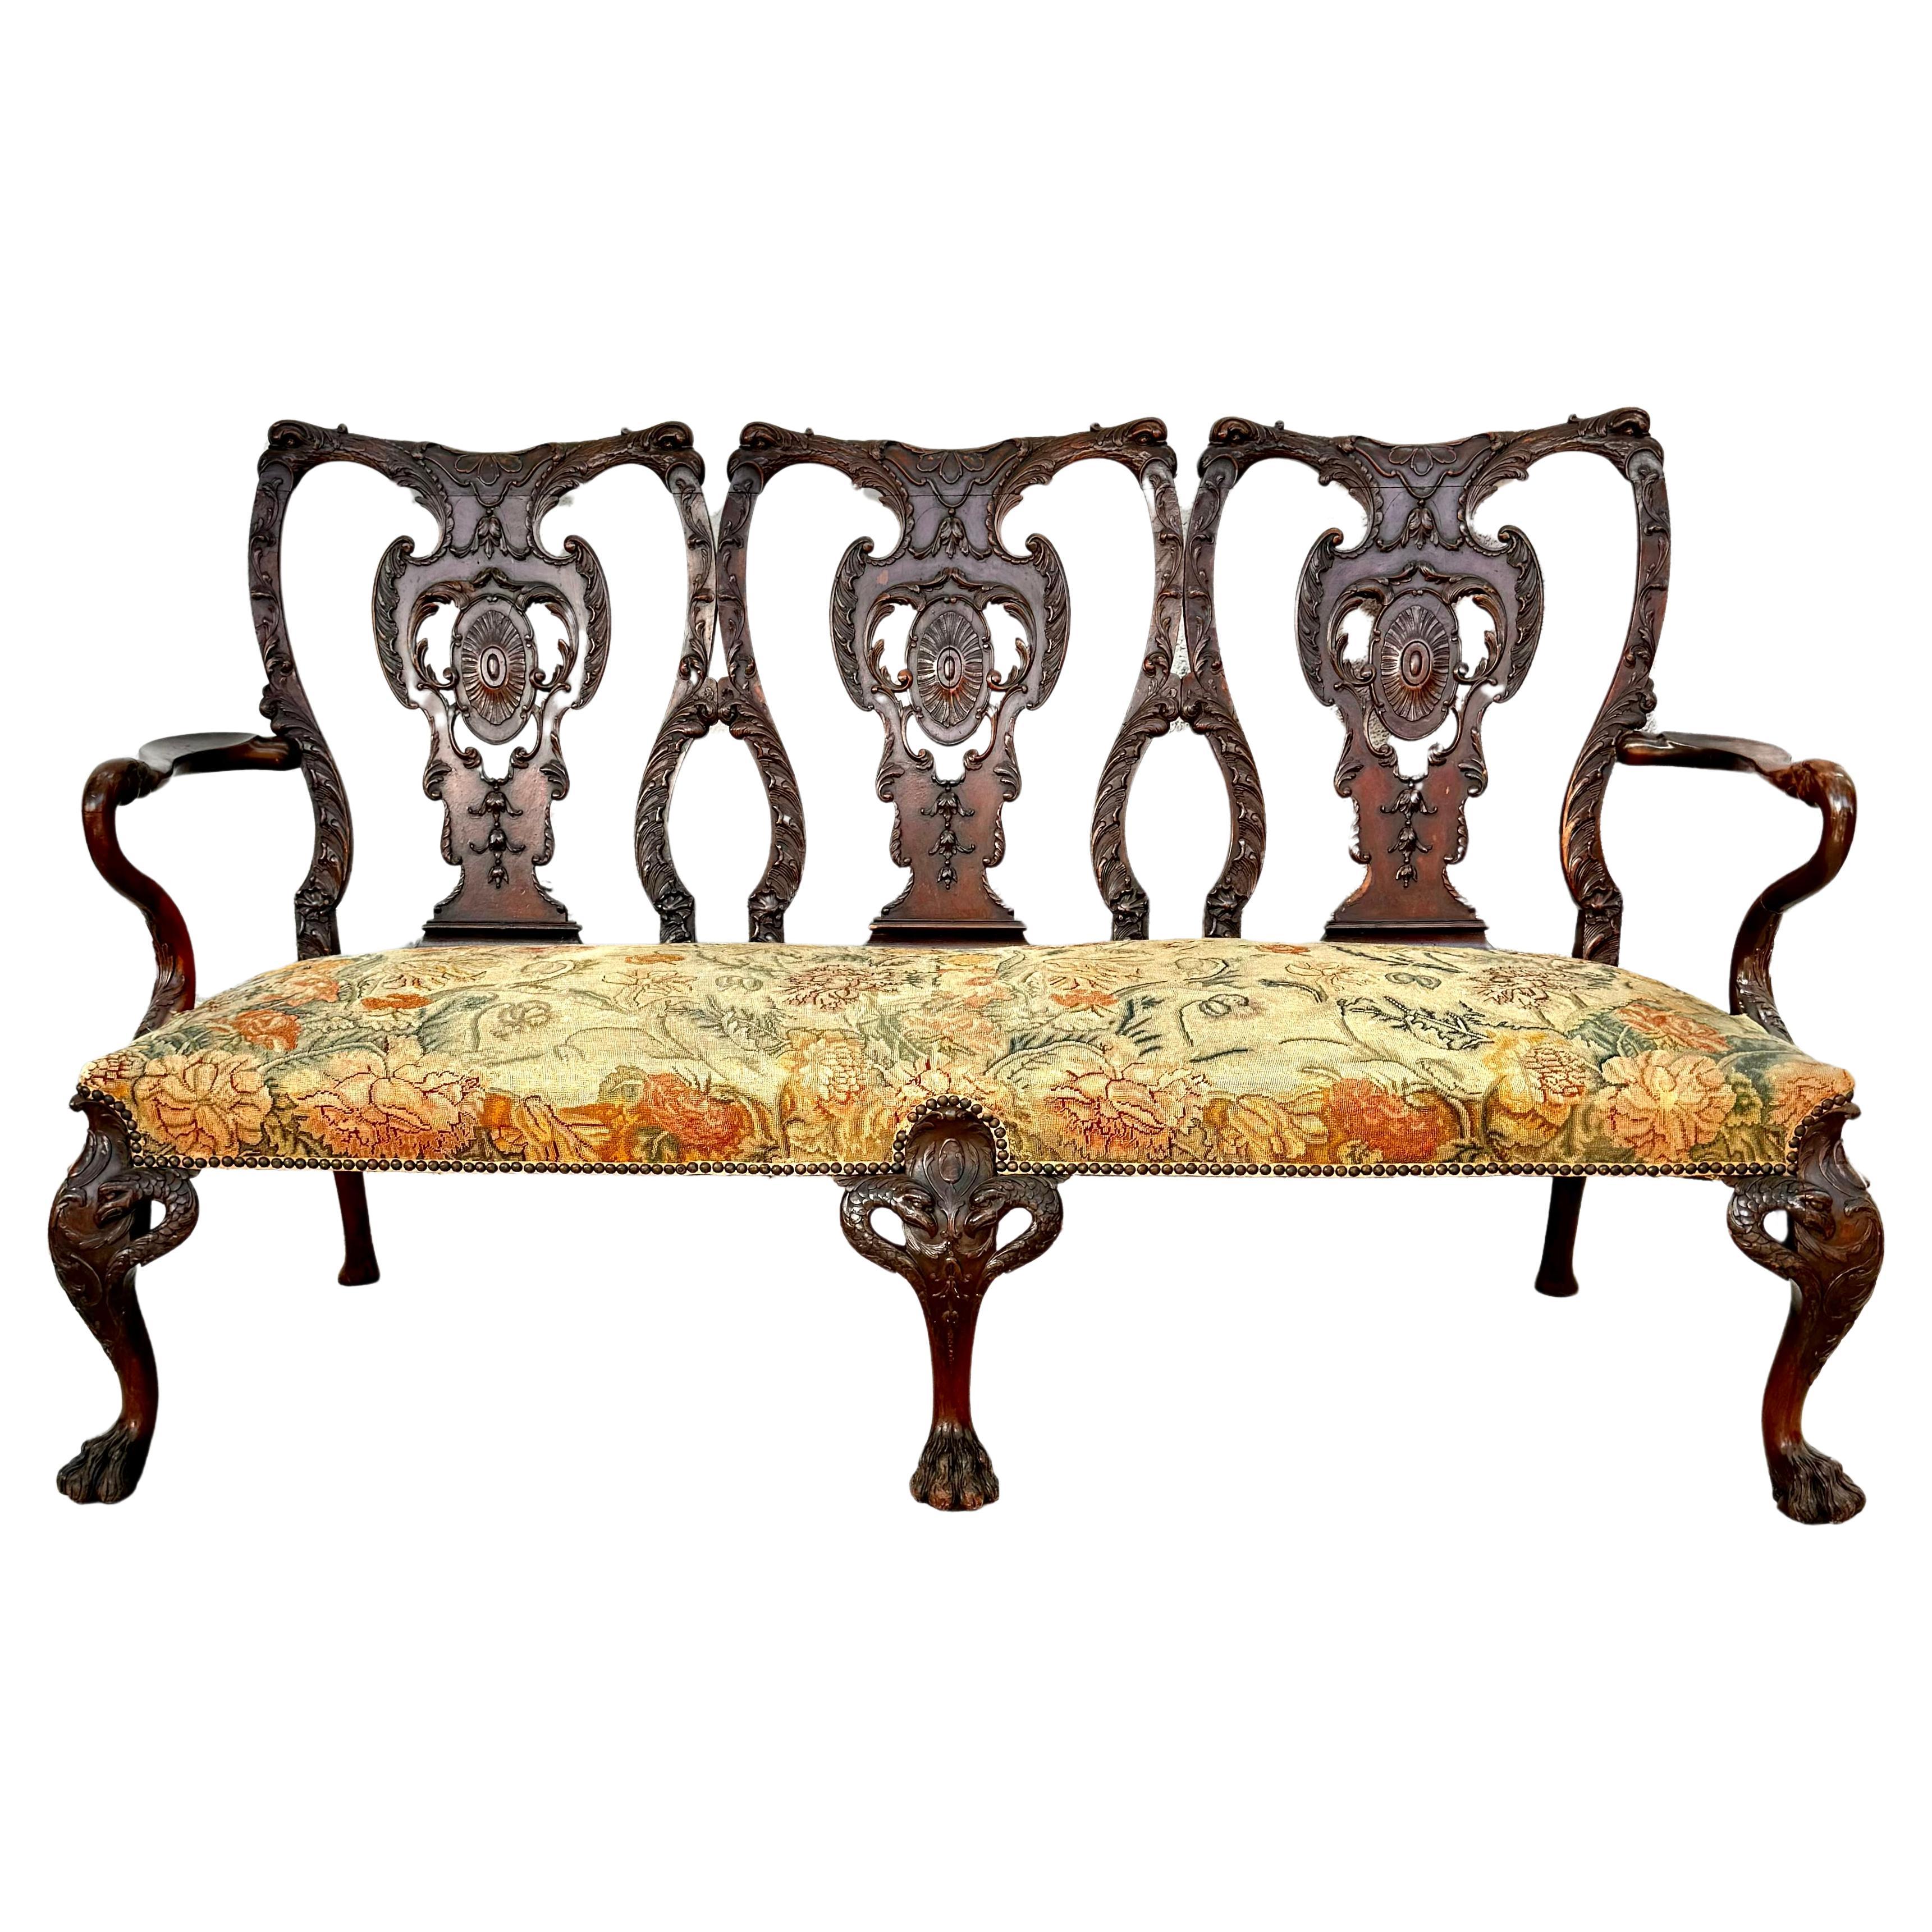 Breathtaking George II Style Carved Wood Settee with Needlepoint Upholstery